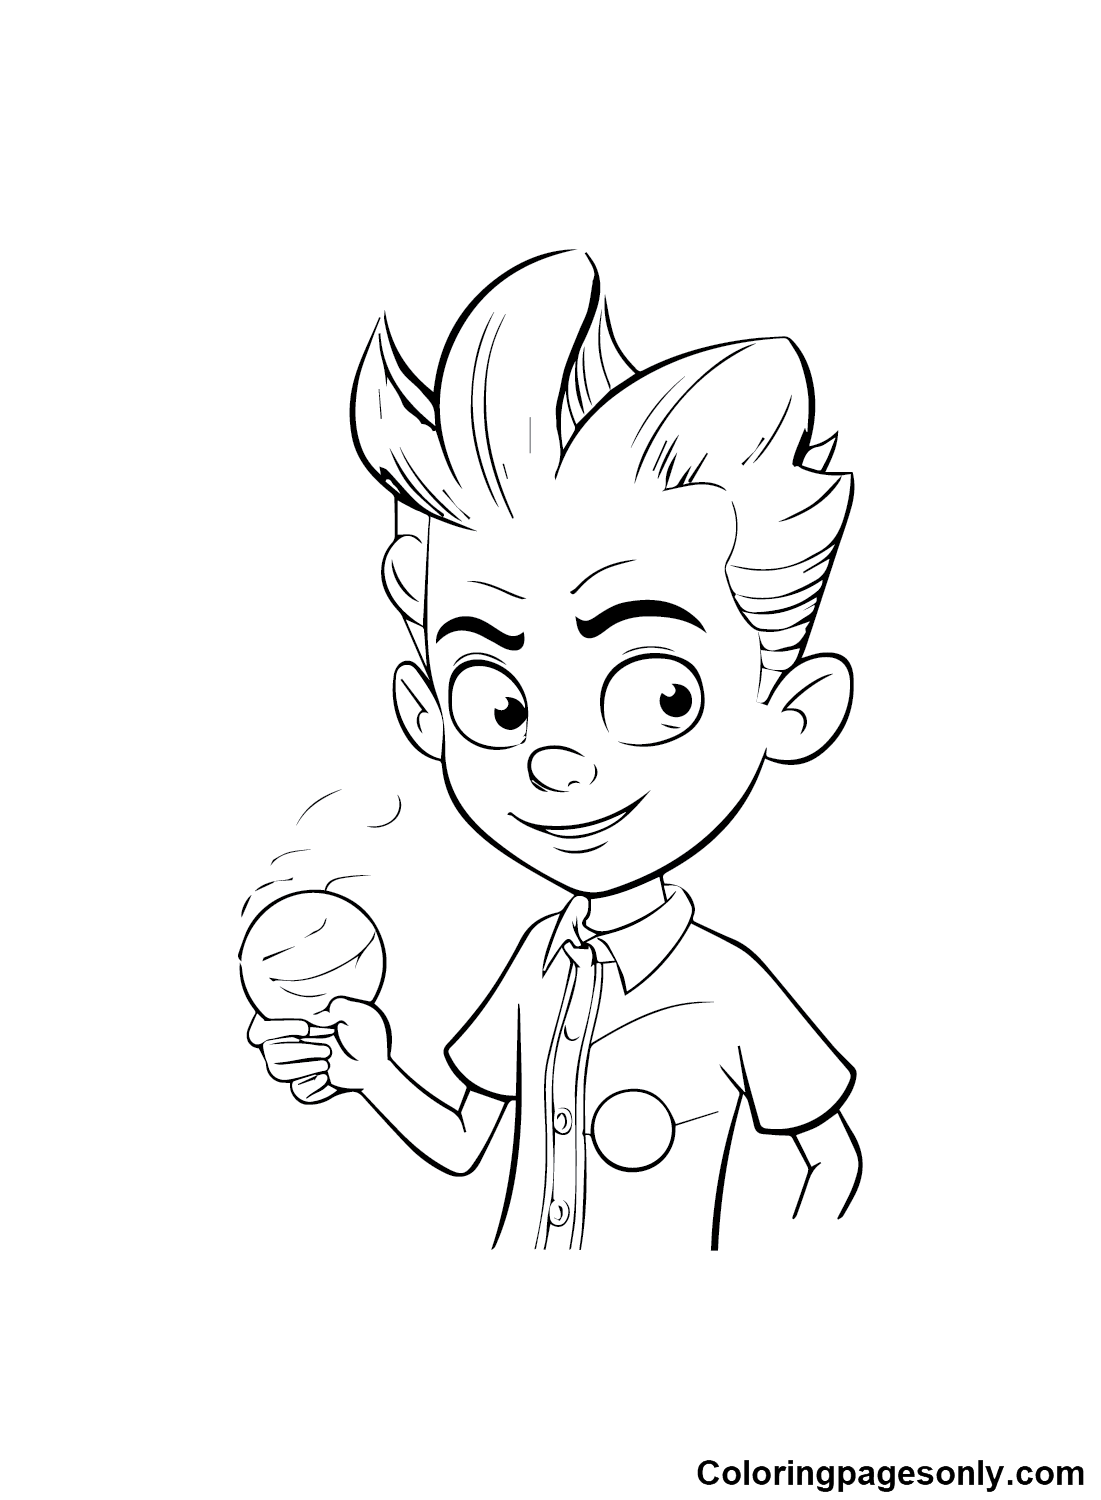 Cartoon Jimmy Neutron Coloring Page